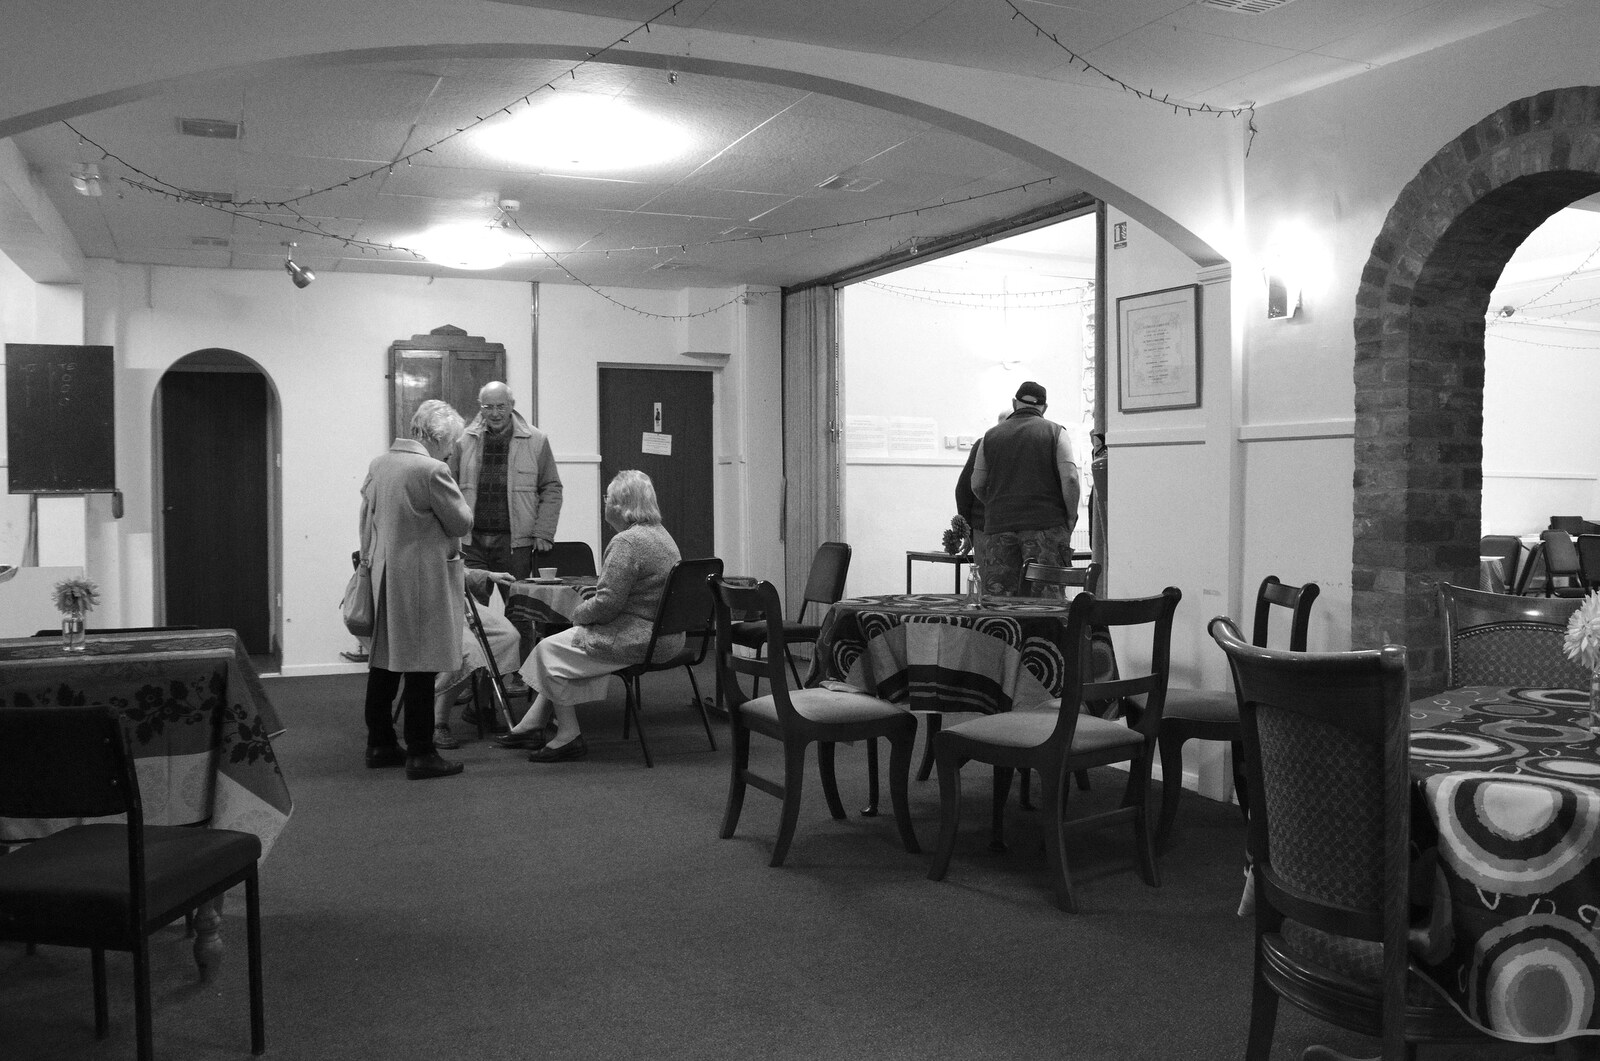 Brome Village Hall from Brome Village Hall's 50th Anniversary, Brome, Suffolk - 12th November 2021